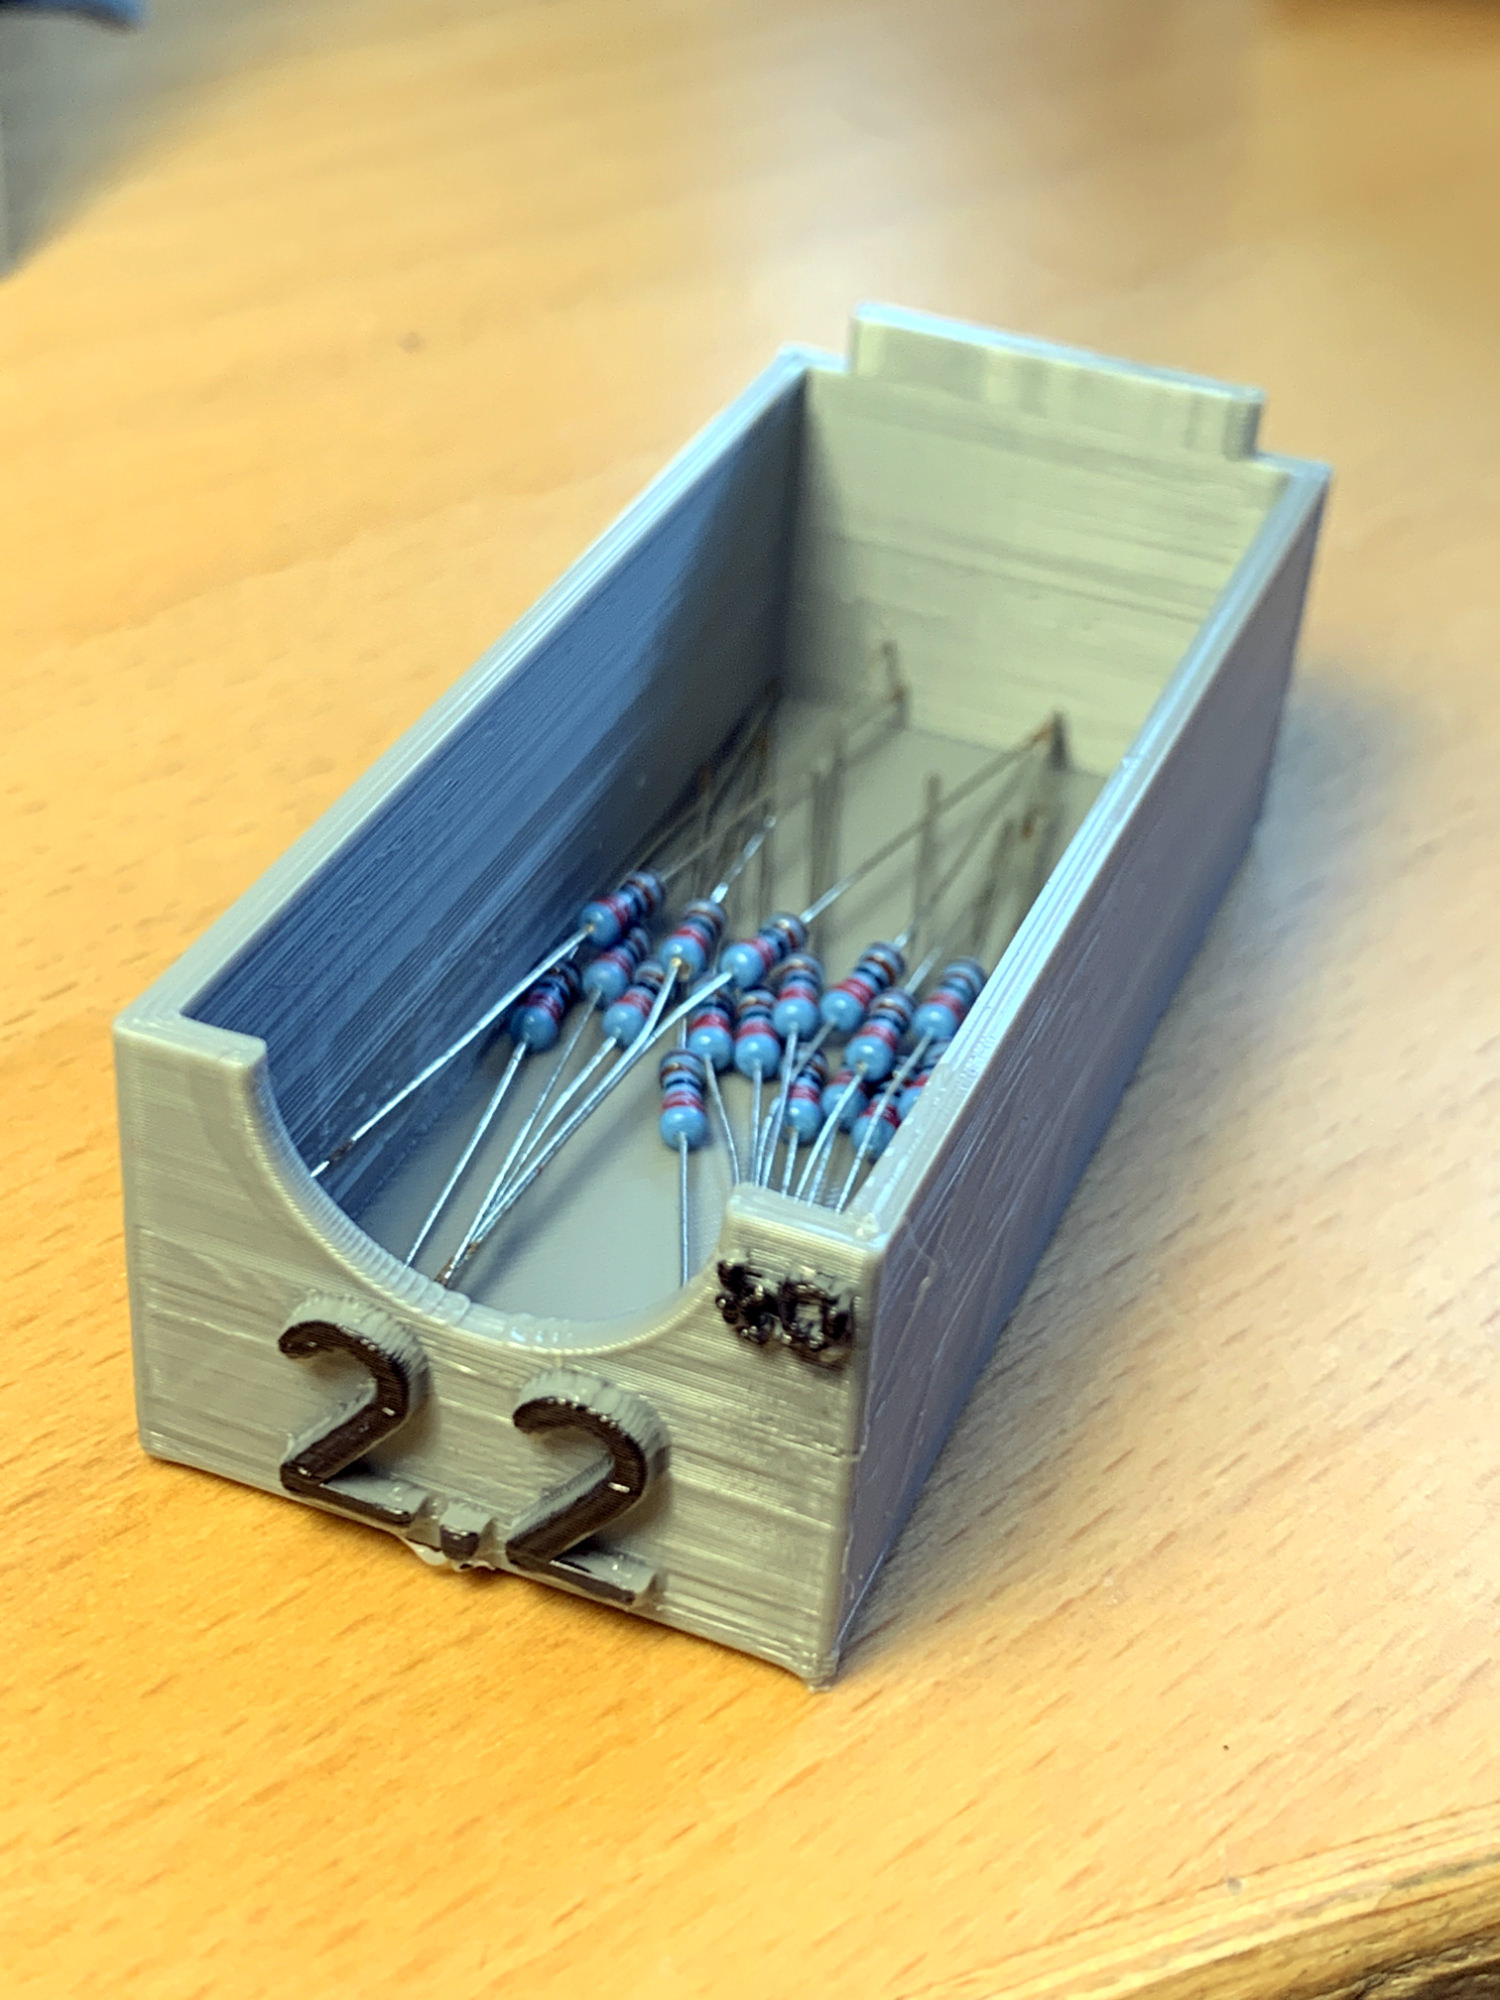 Small parts storage drawer rack by LapplandsCohan | Download free STL ...